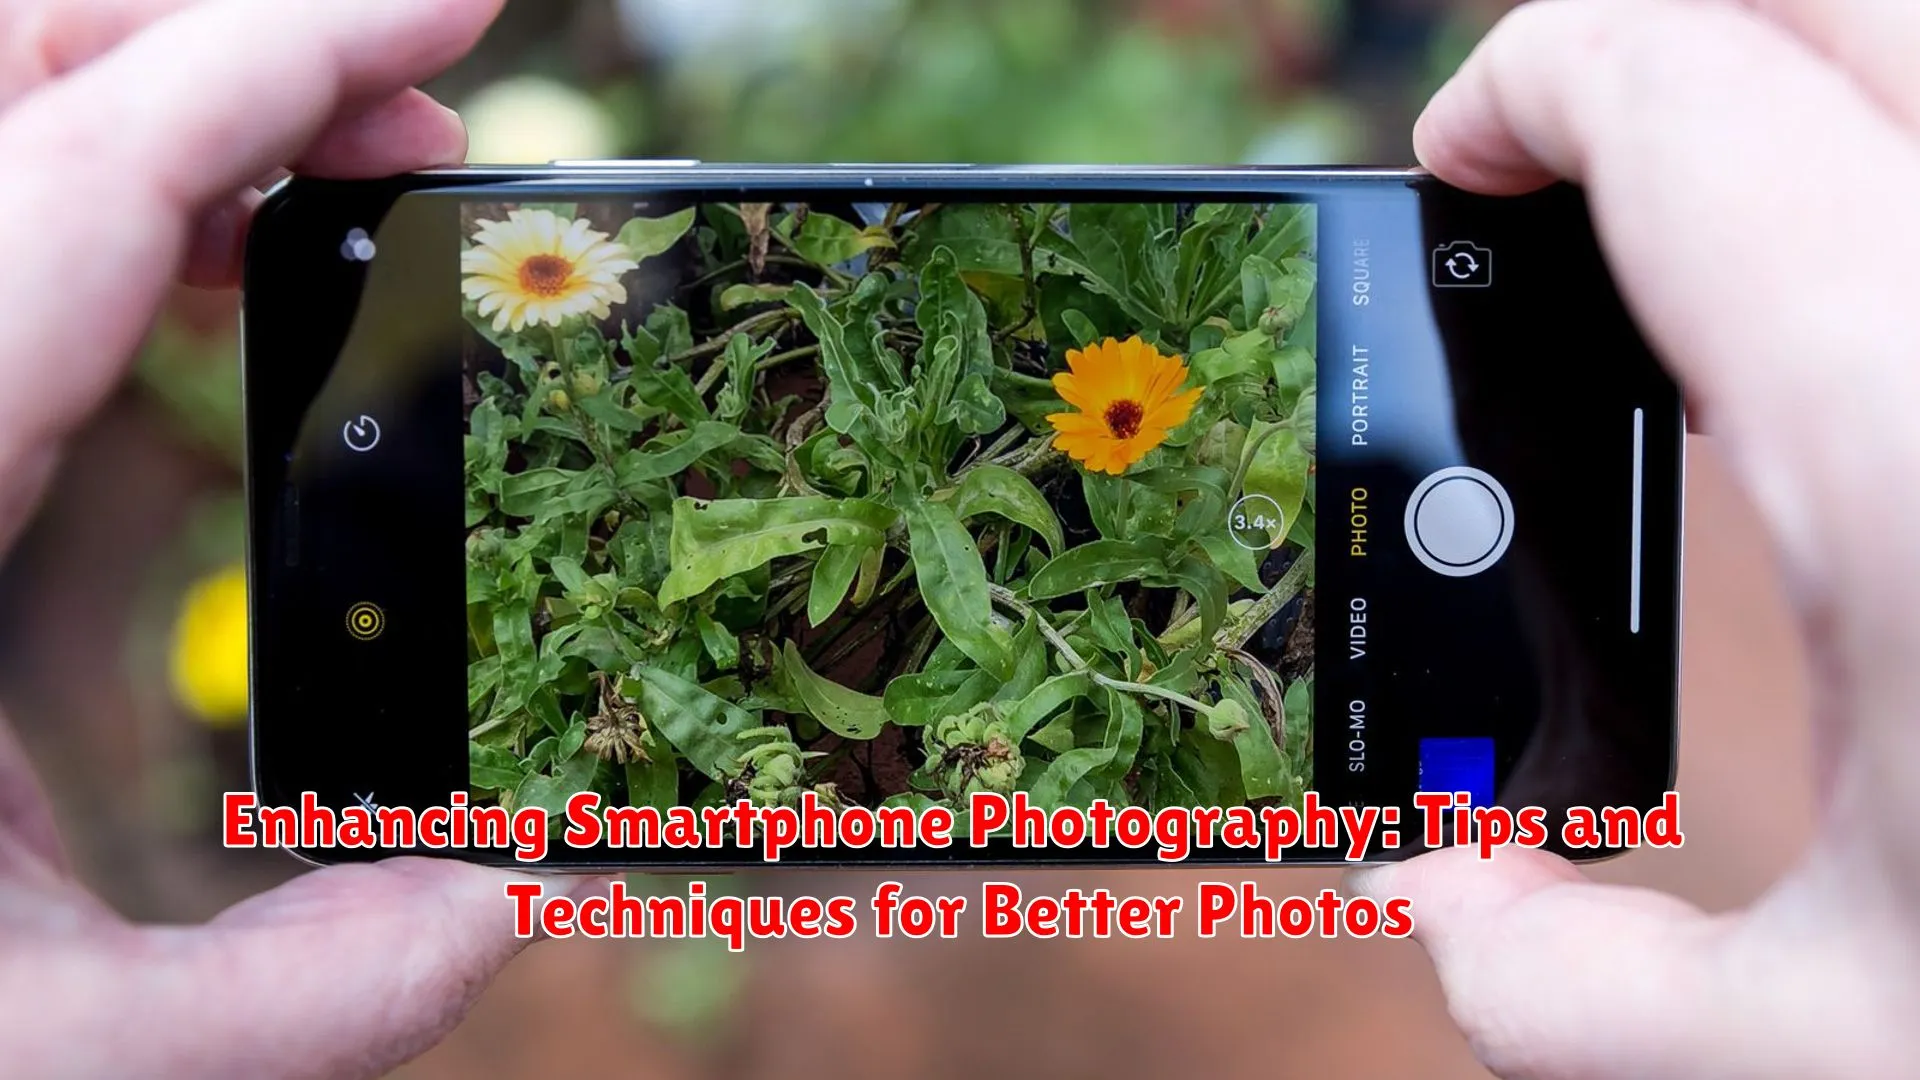 Enhancing Smartphone Photography: Tips and Techniques for Better Photos